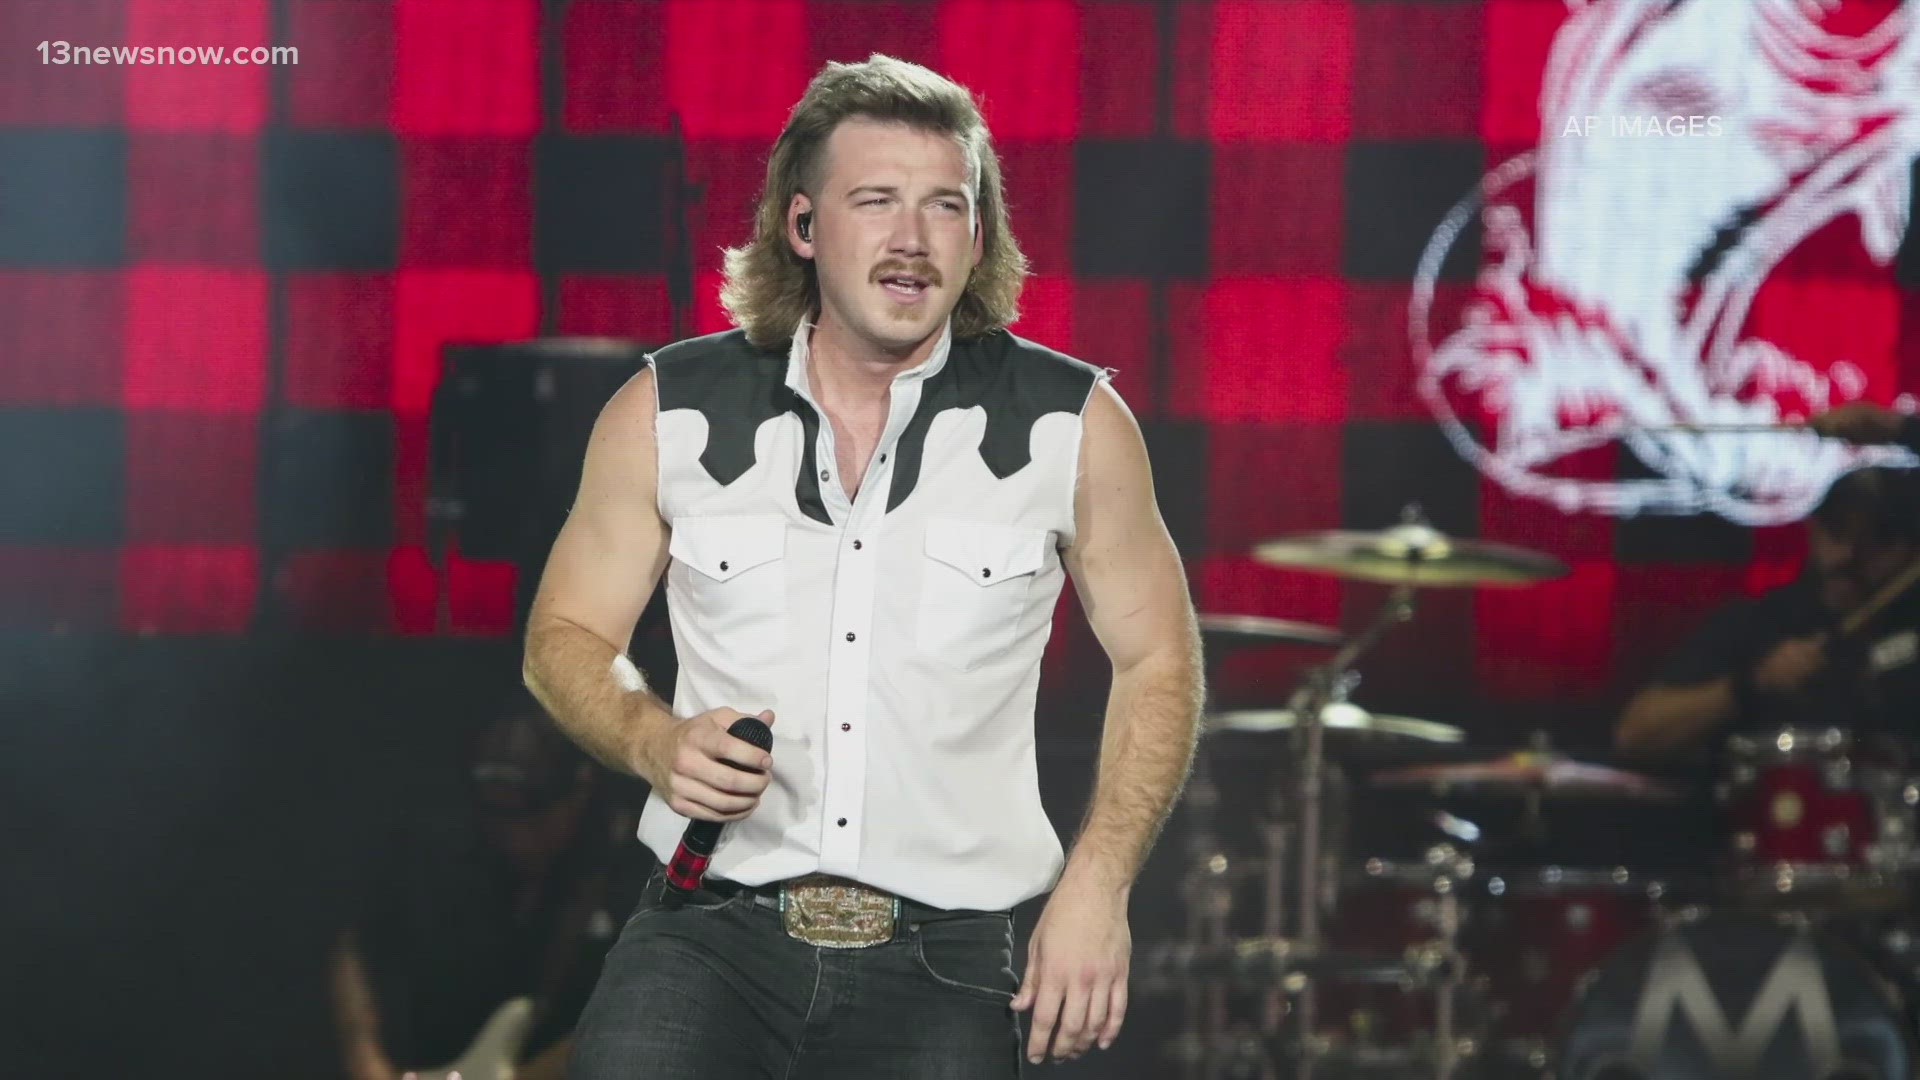 Country music singer Morgan Wallen says he's on vocal rest for at least the next six weeks.